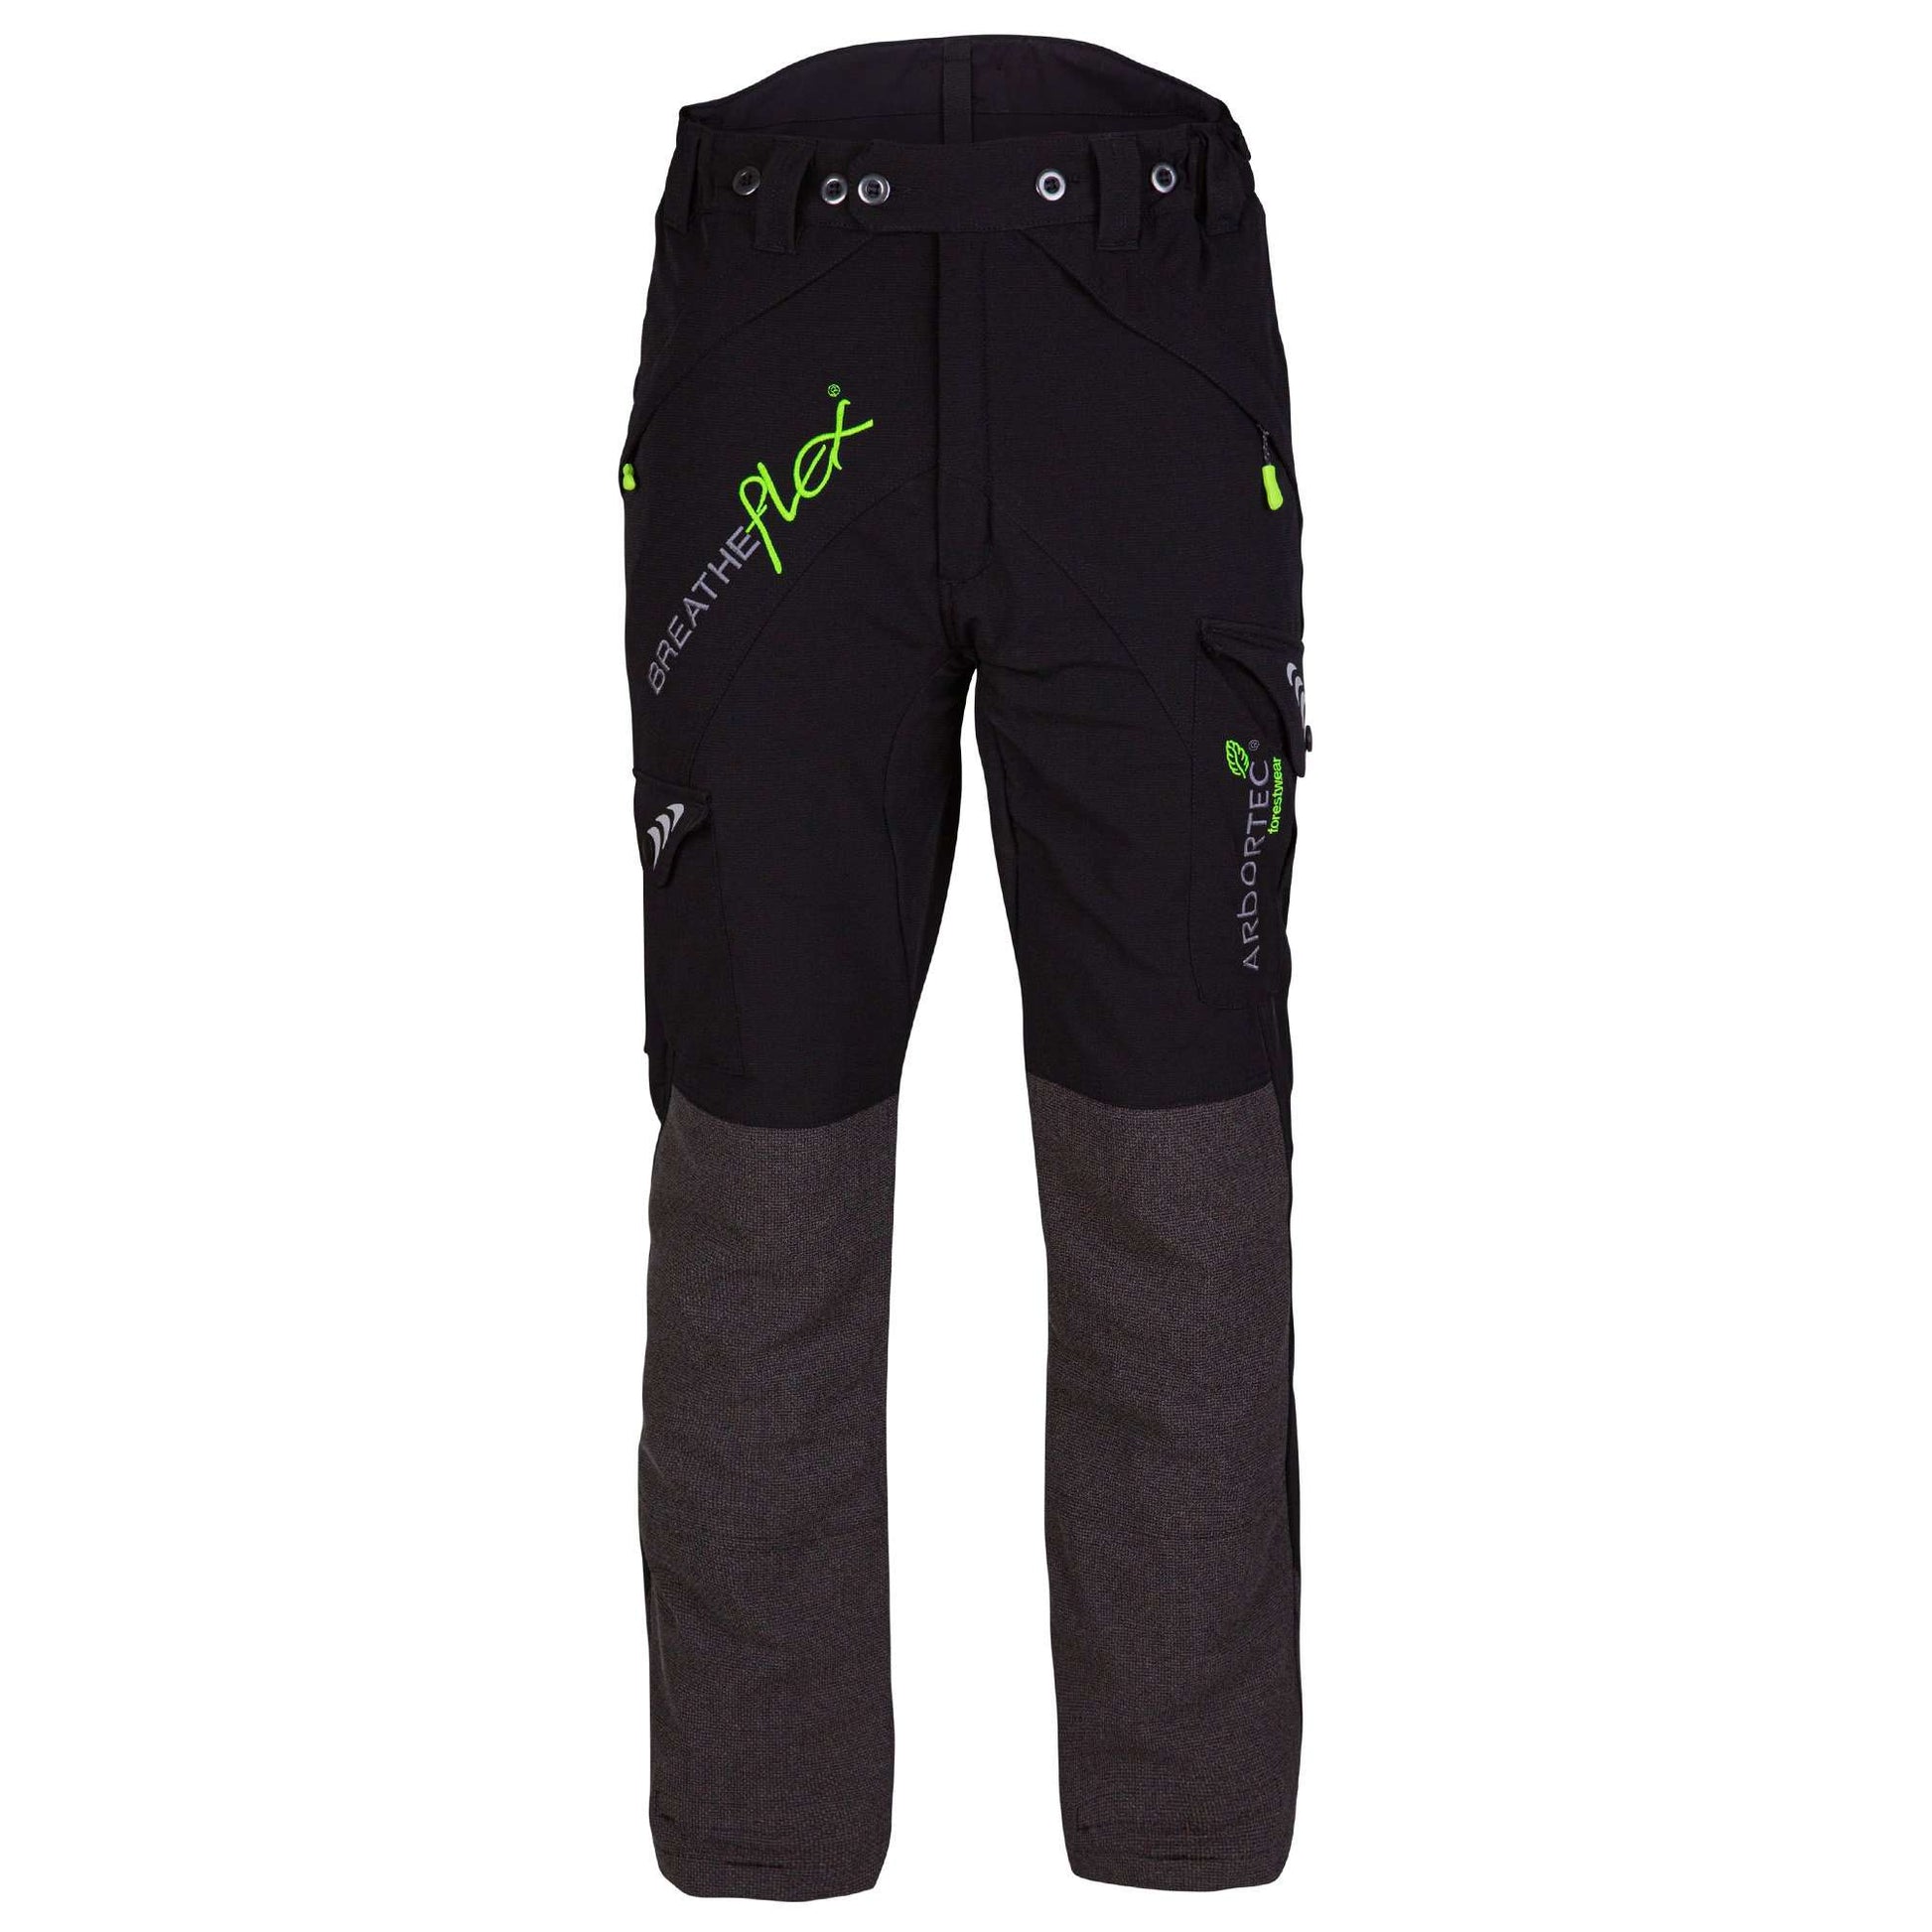 AT4010 Breatheflex Type A Class 1 Chainsaw Trousers - Black - Arbortec Forestwear